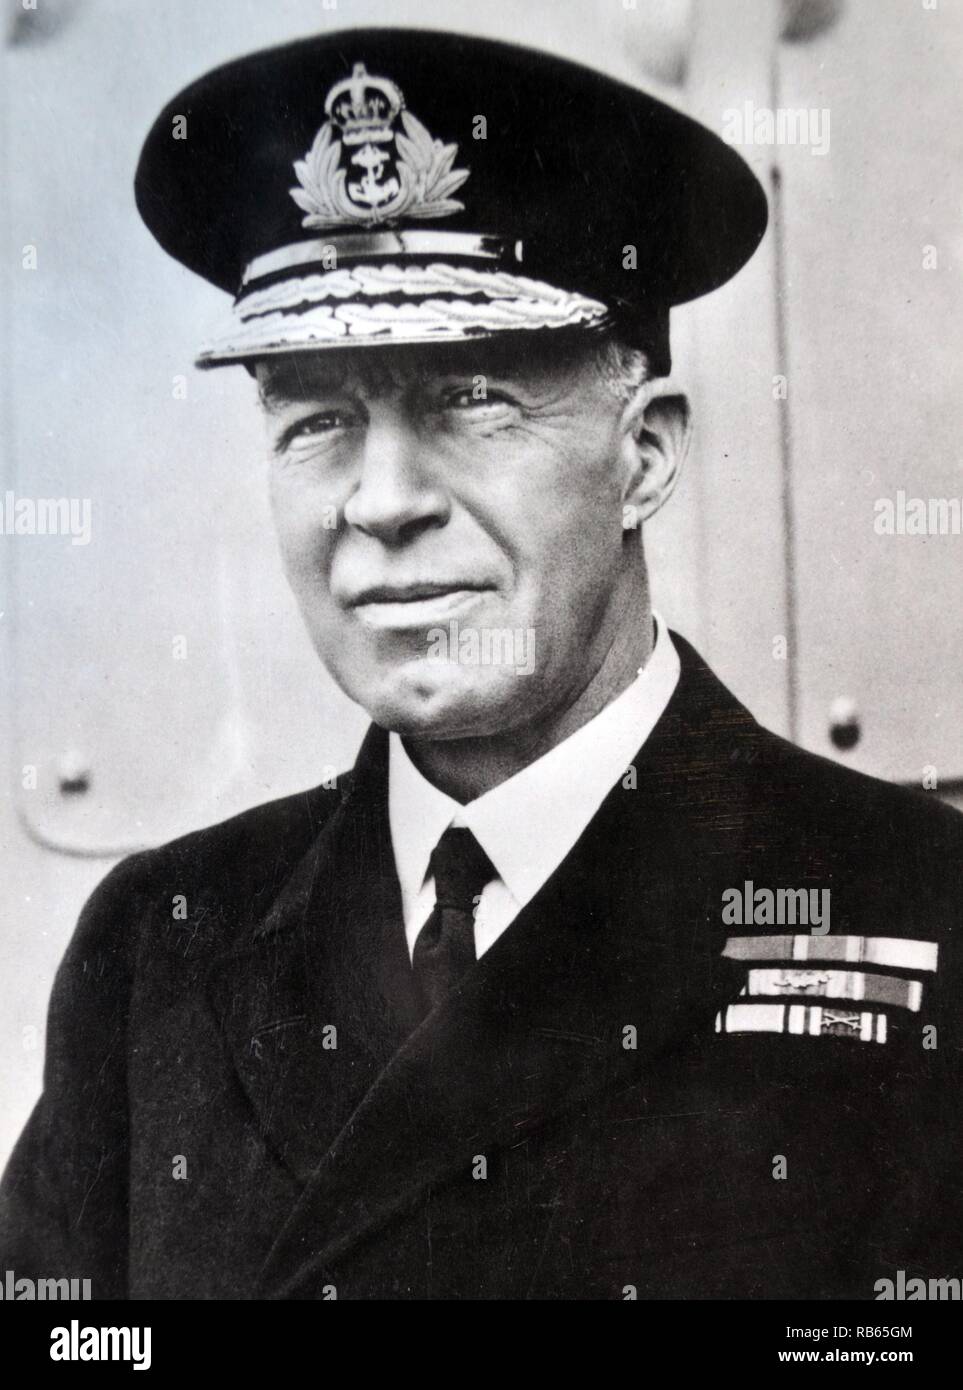 Admiral of the fleet, Sir Charles Forbes 1880 - 1960. Royal Navy officer. saw action at the Battle of Jutland from Jellicoe's flagship HMS Iron Duke. Rear Admiral commanding the Destroyer Flotillas in the Mediterranean Fleet in 1930. February 1932 Forbes became Third Sea Lord and Controller of the Navy. Commander-in-Chief, Home Fleet 1938-1940. Stock Photo